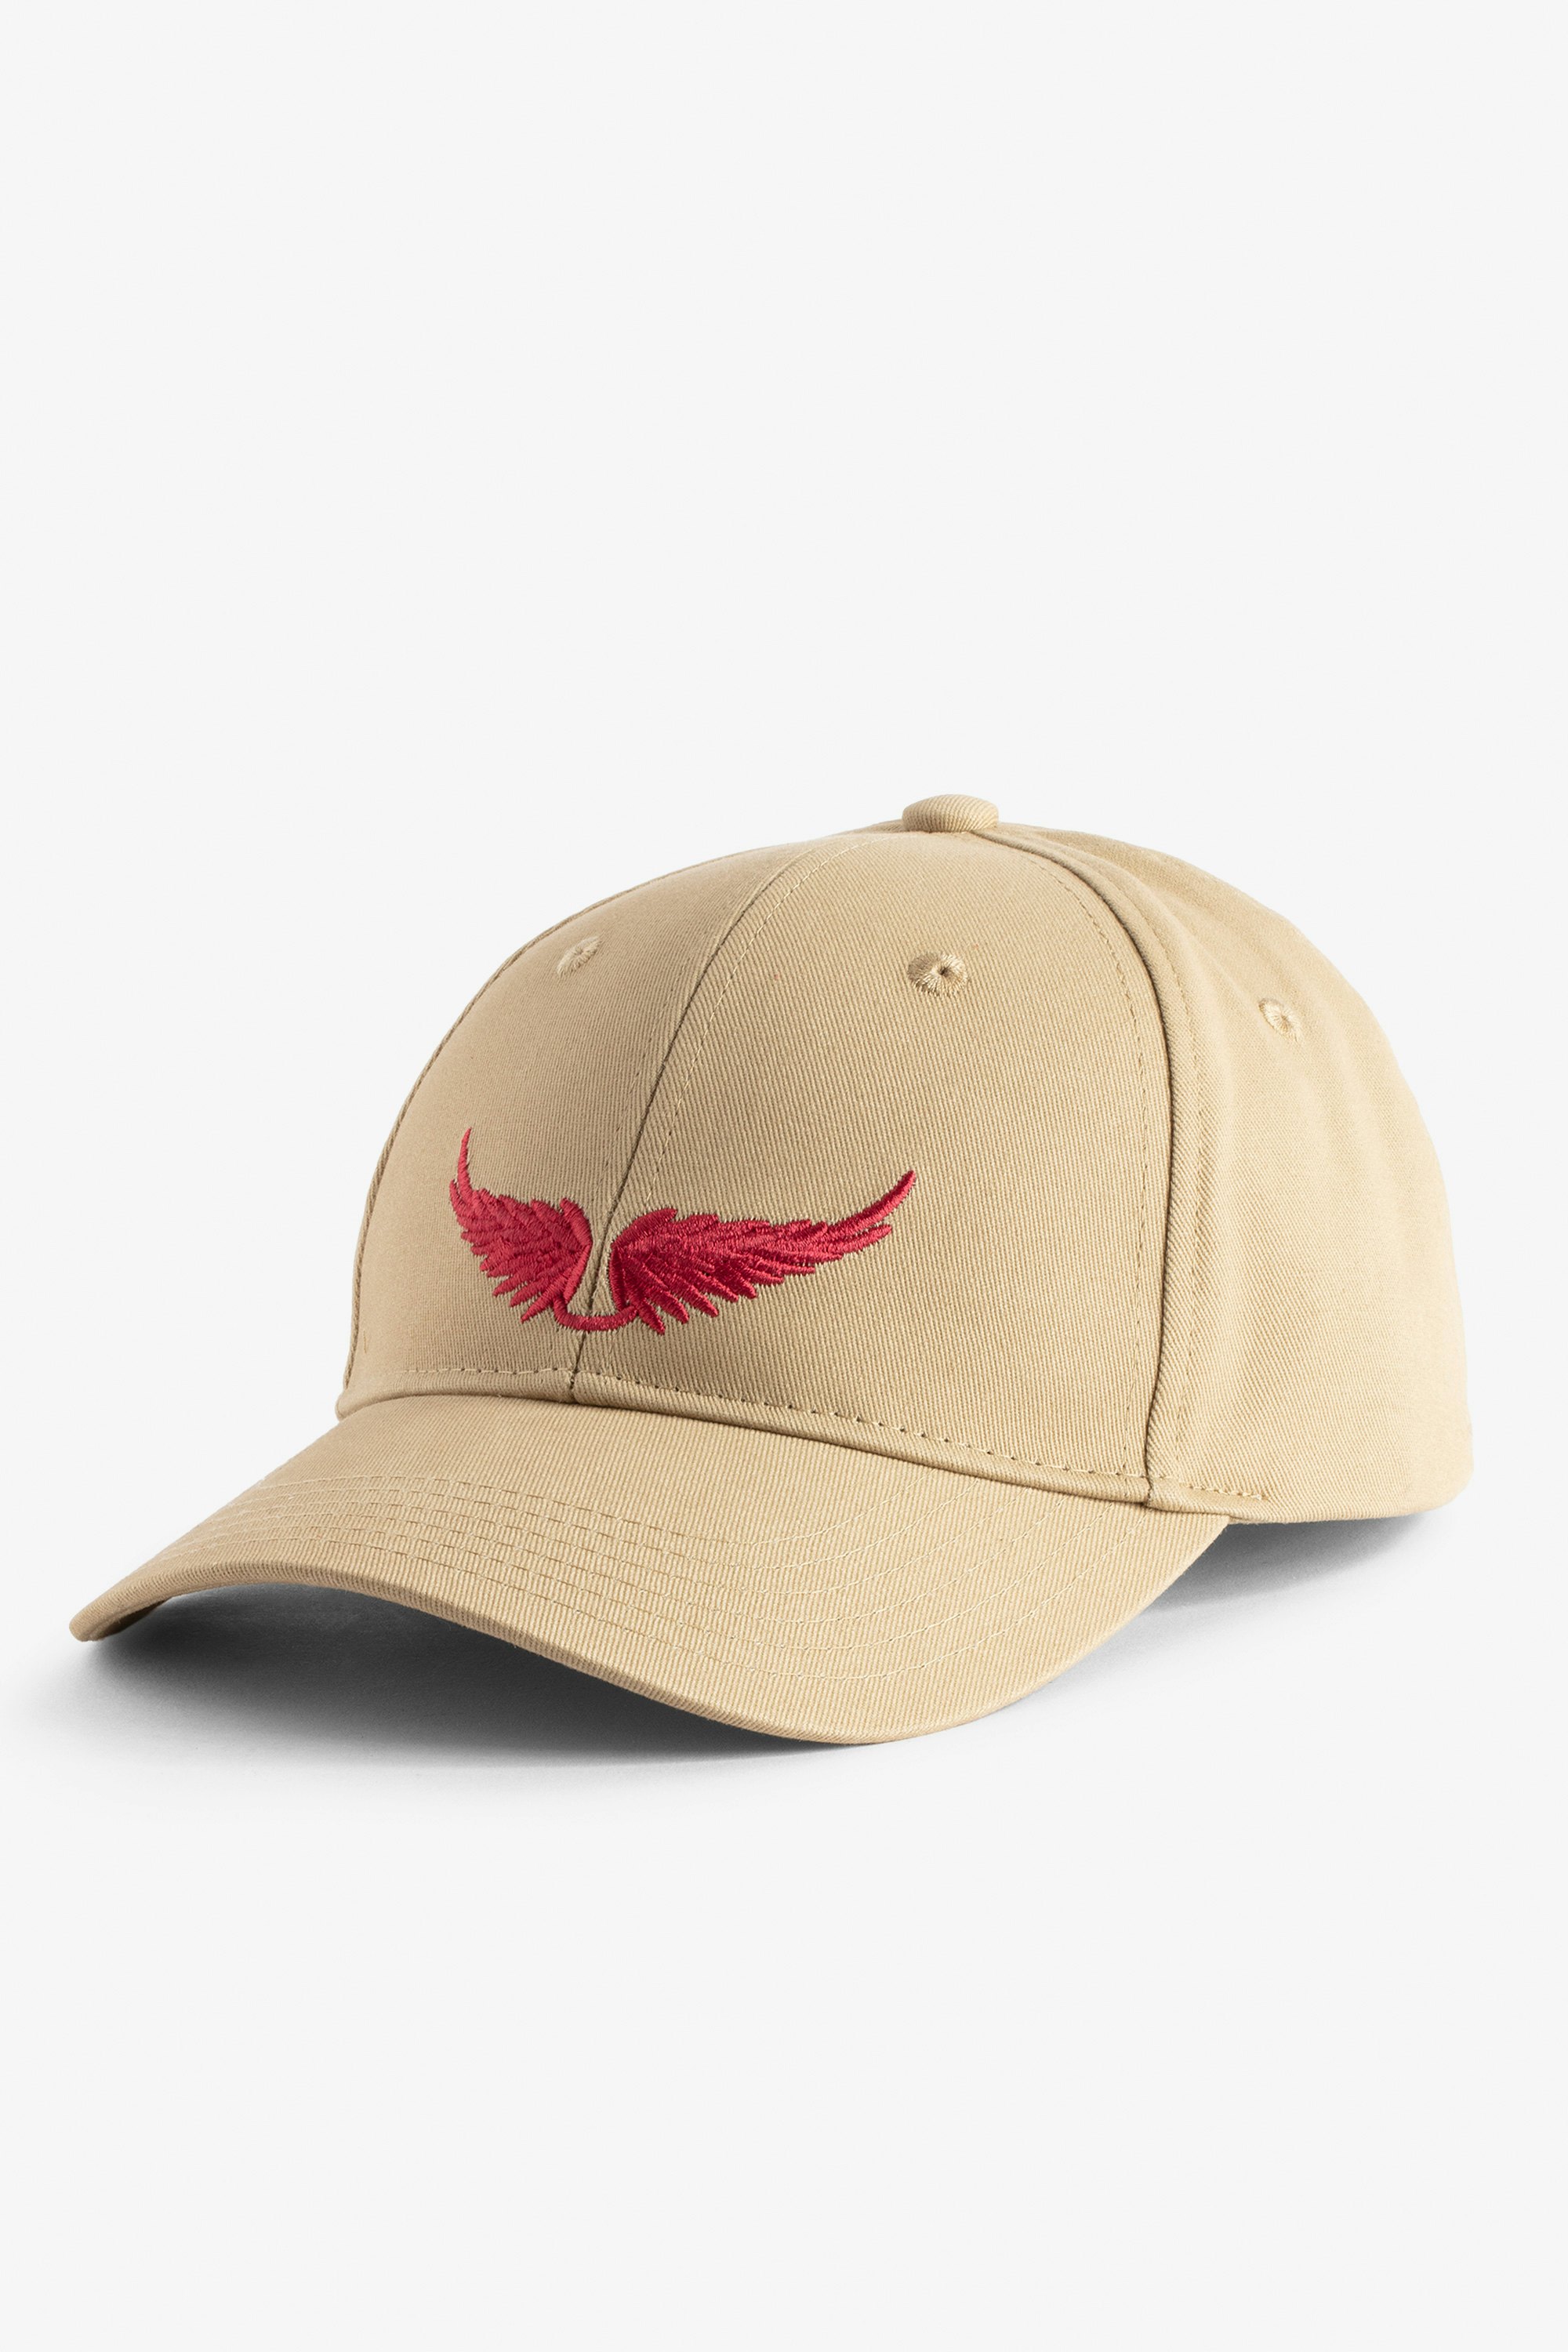 Klelia Rock Baseball Cap Women’s brown cotton baseball cap with embroidered wings.